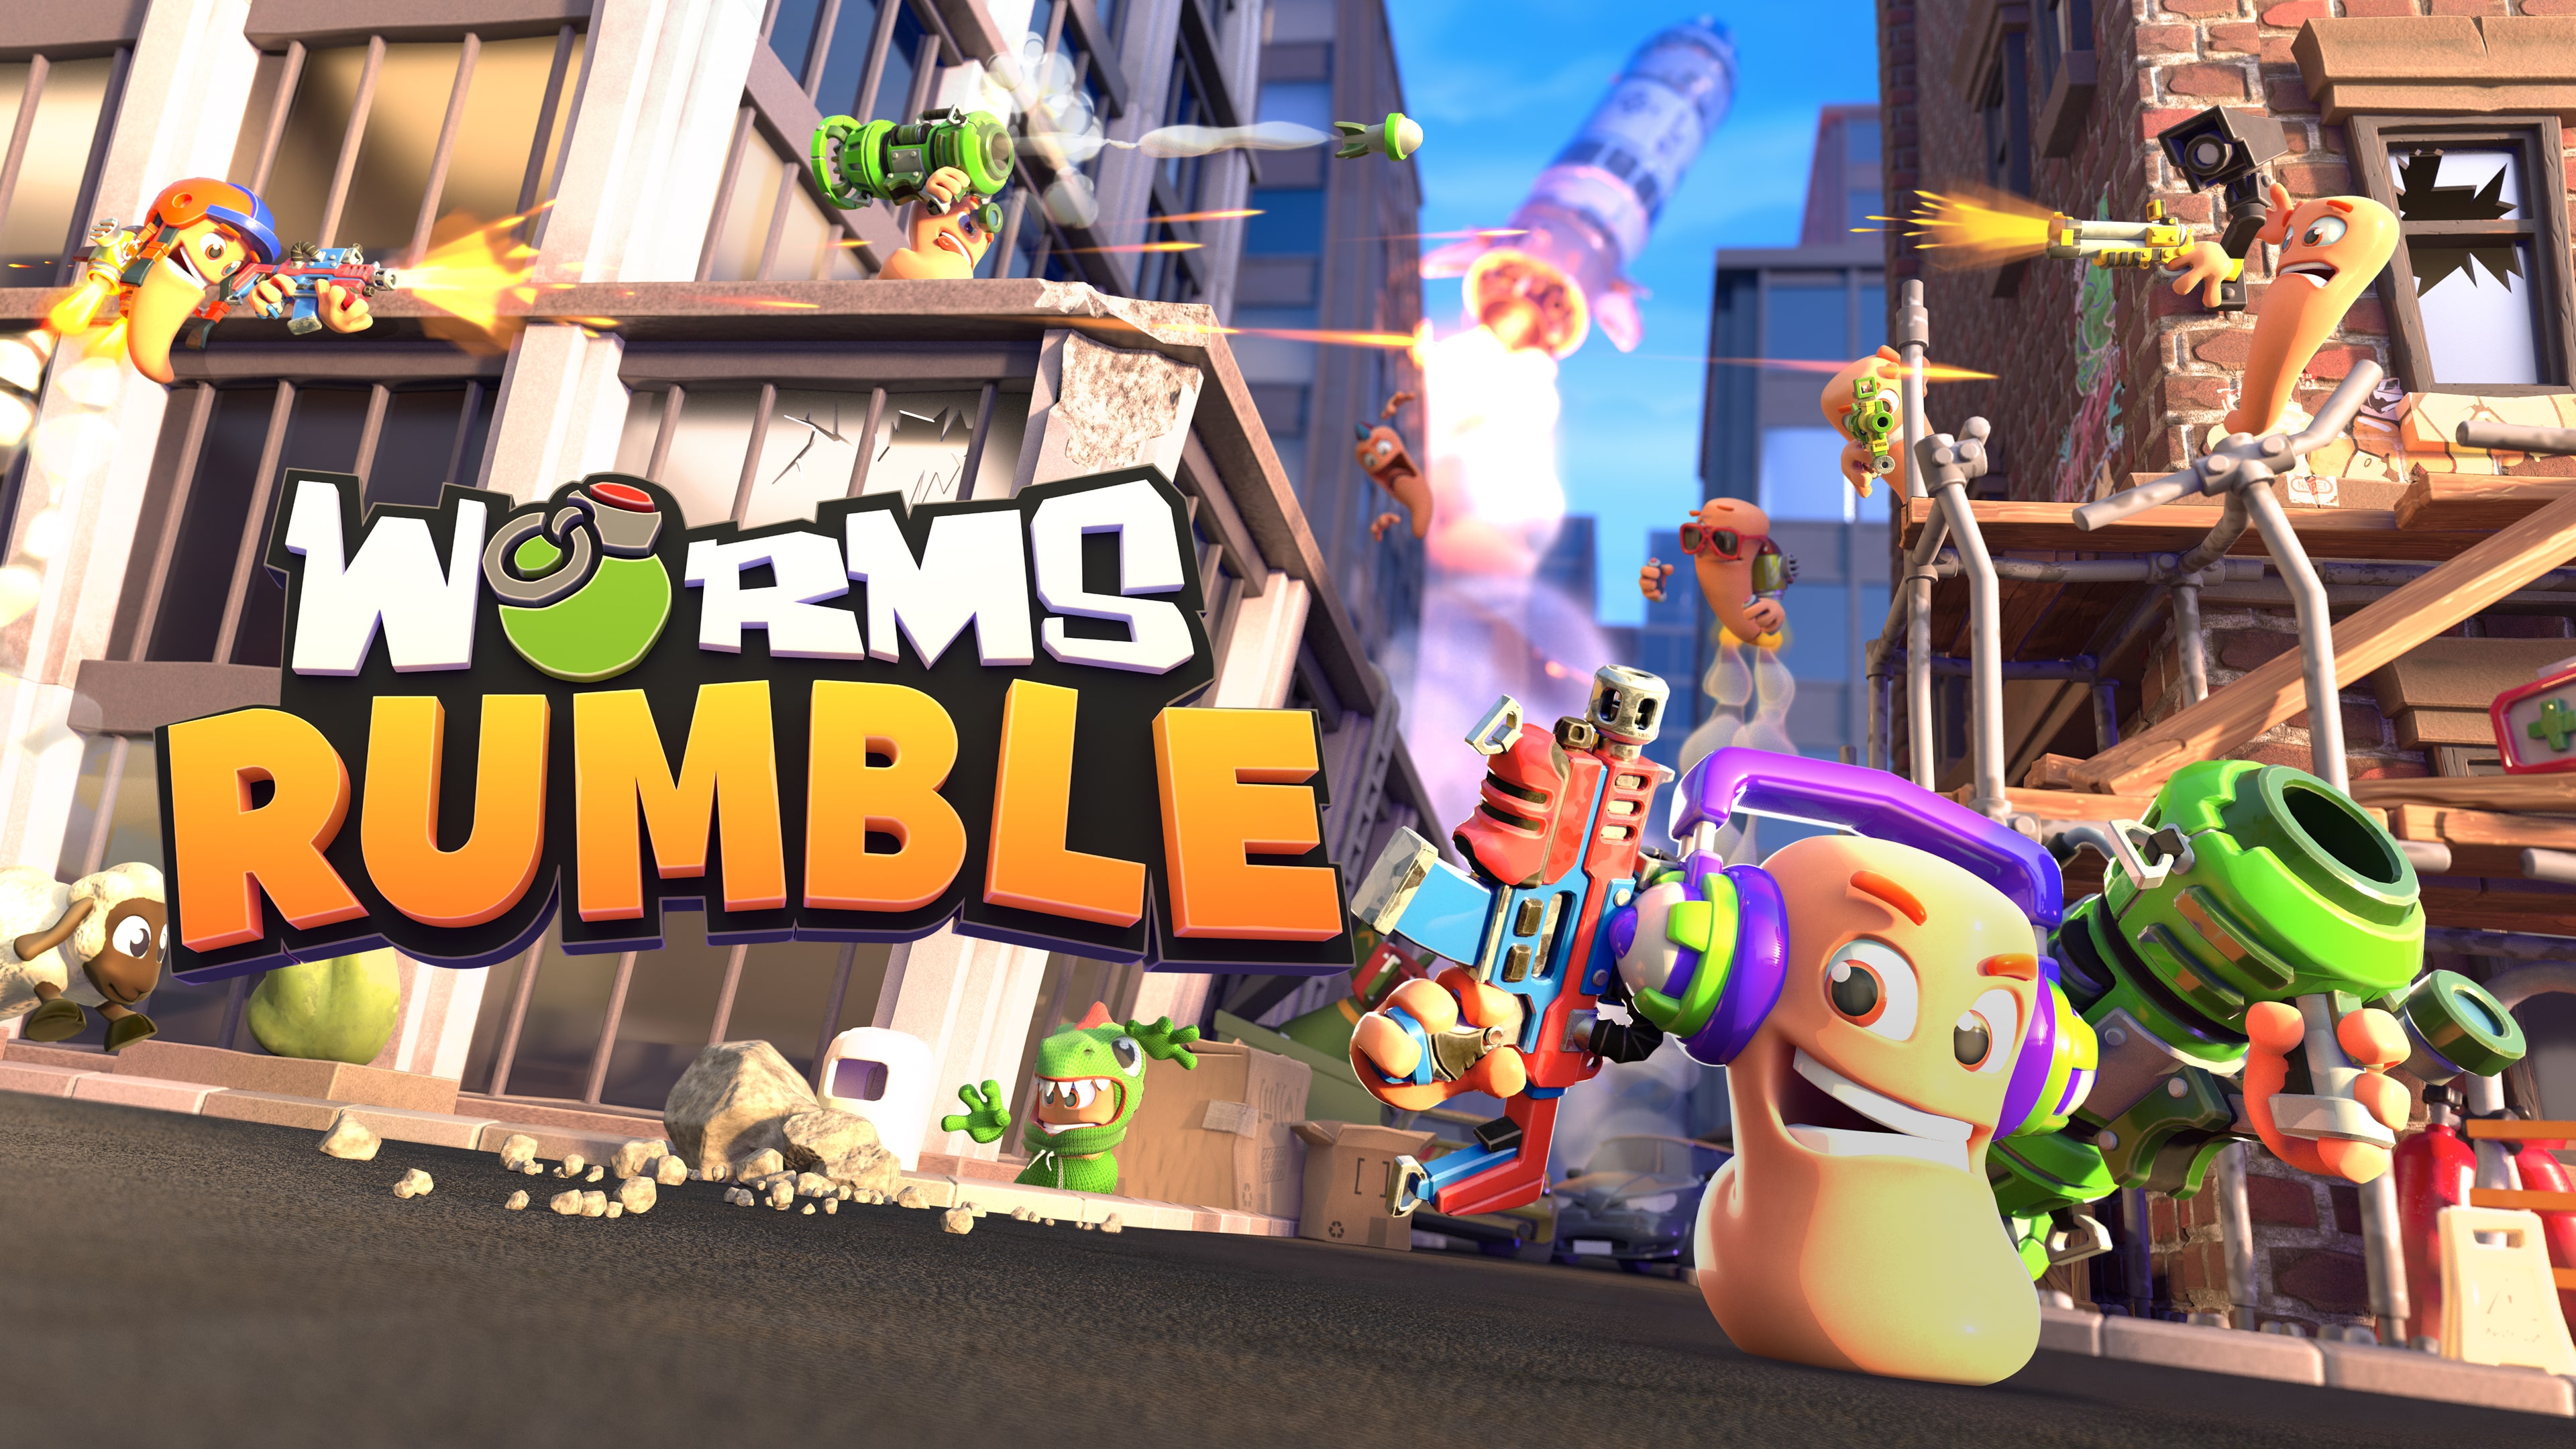 Worms Rumble PS4 & PS5 (Simplified Chinese, English, Korean, Japanese, Traditional Chinese)